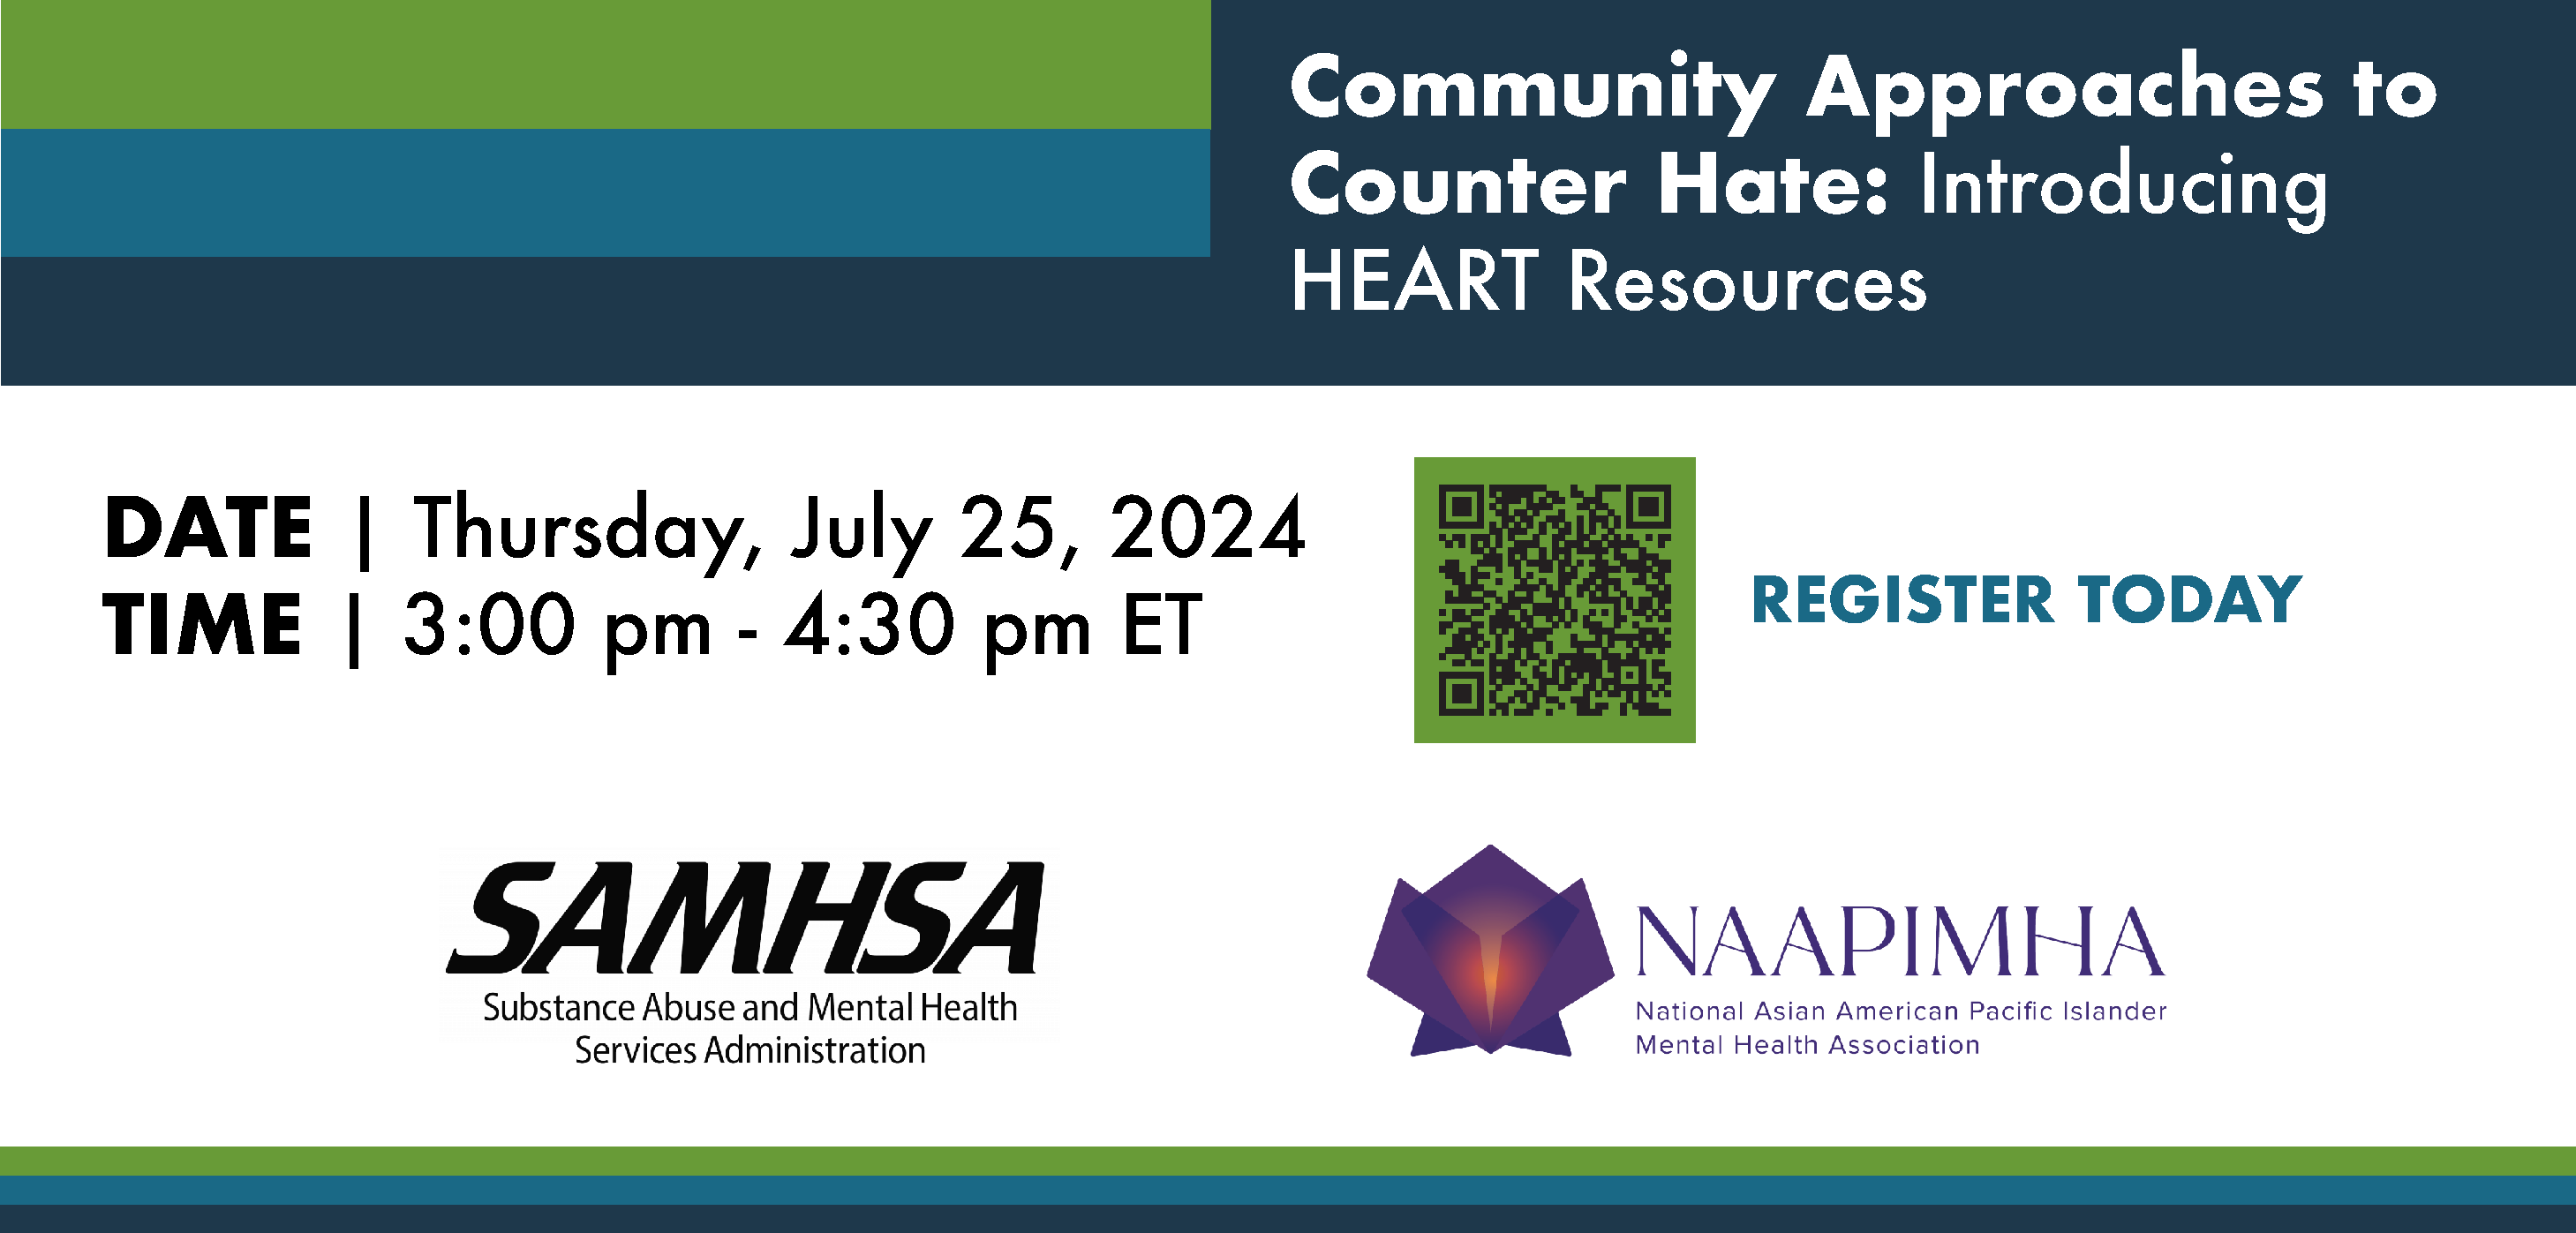 Community Approaches to Counter Hate: Introducing HEART Resources